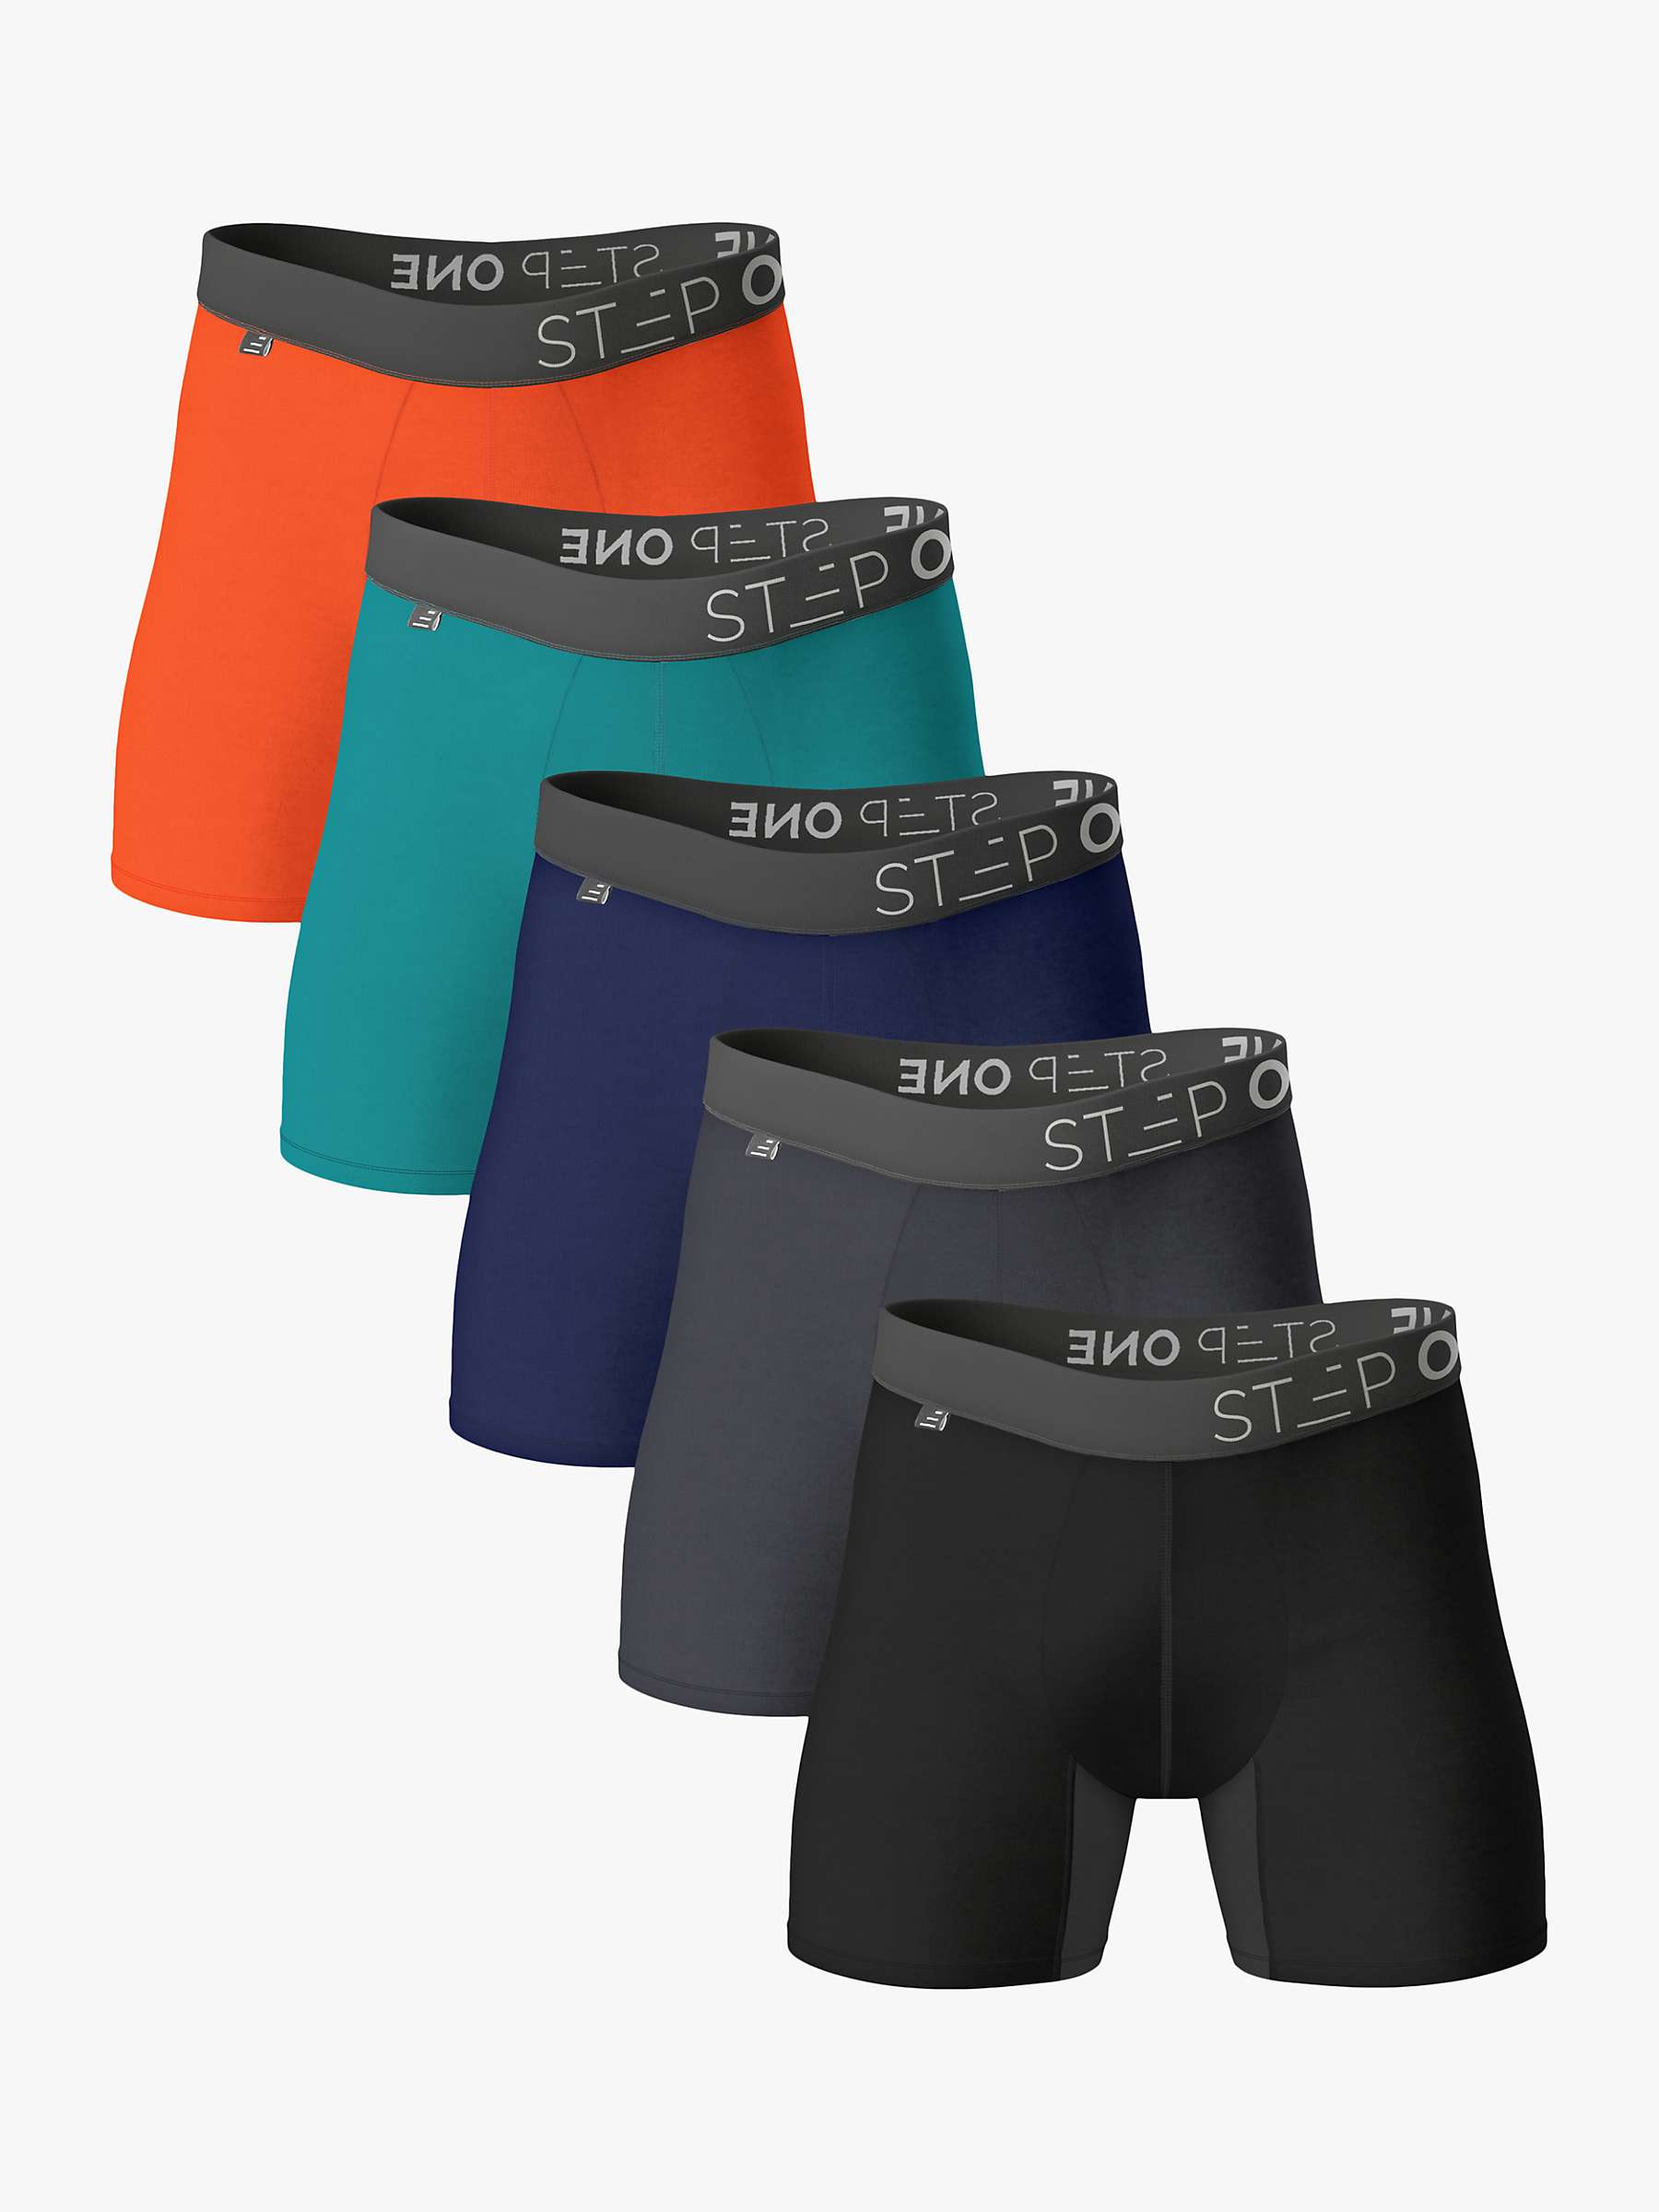 Buy Step One Bamboo Trunks, Pack of 5 Online at johnlewis.com